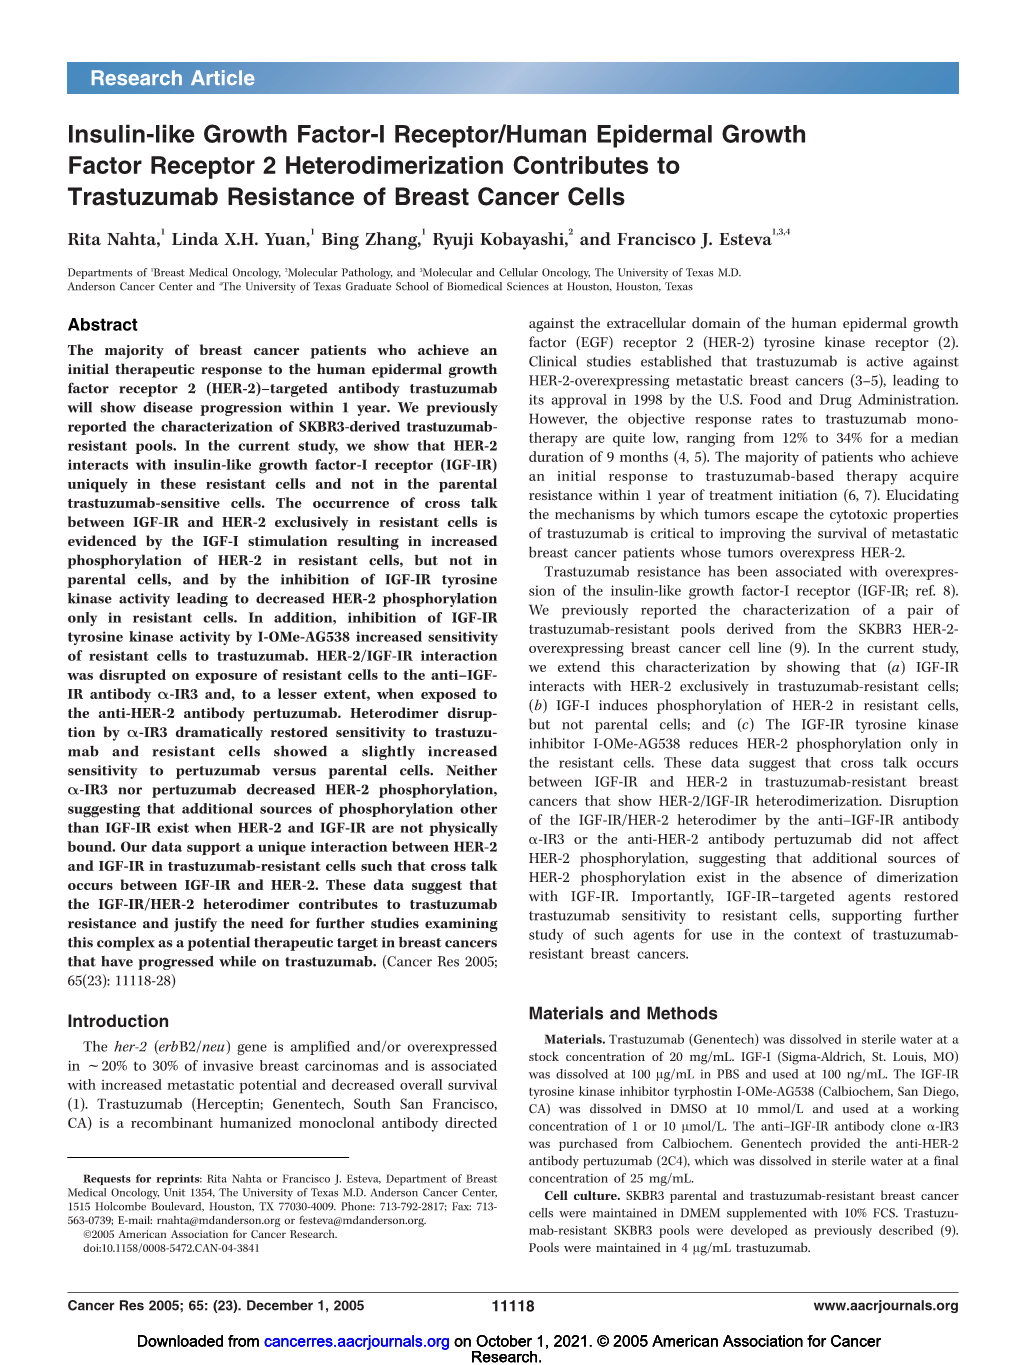 Insulin-Like Growth Factor-I Receptor/Human Epidermal Growth Factor Receptor 2 Heterodimerization Contributes to Trastuzumab Resistance of Breast Cancer Cells